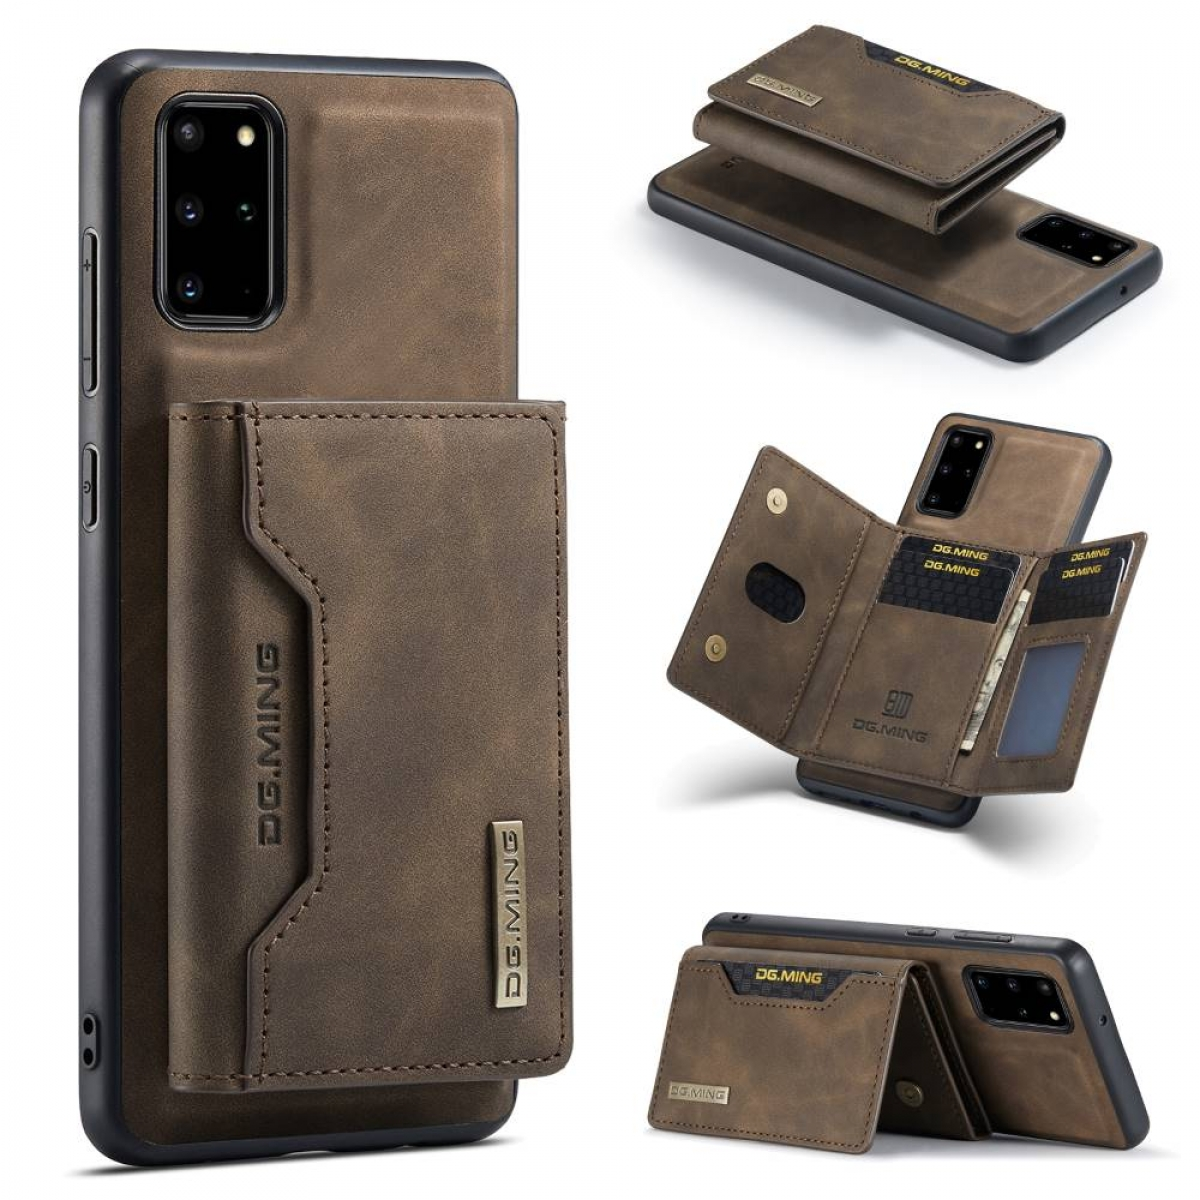 Plus, Coffee Galaxy Backcover, 2in1, DG MING Samsung, M2 S20